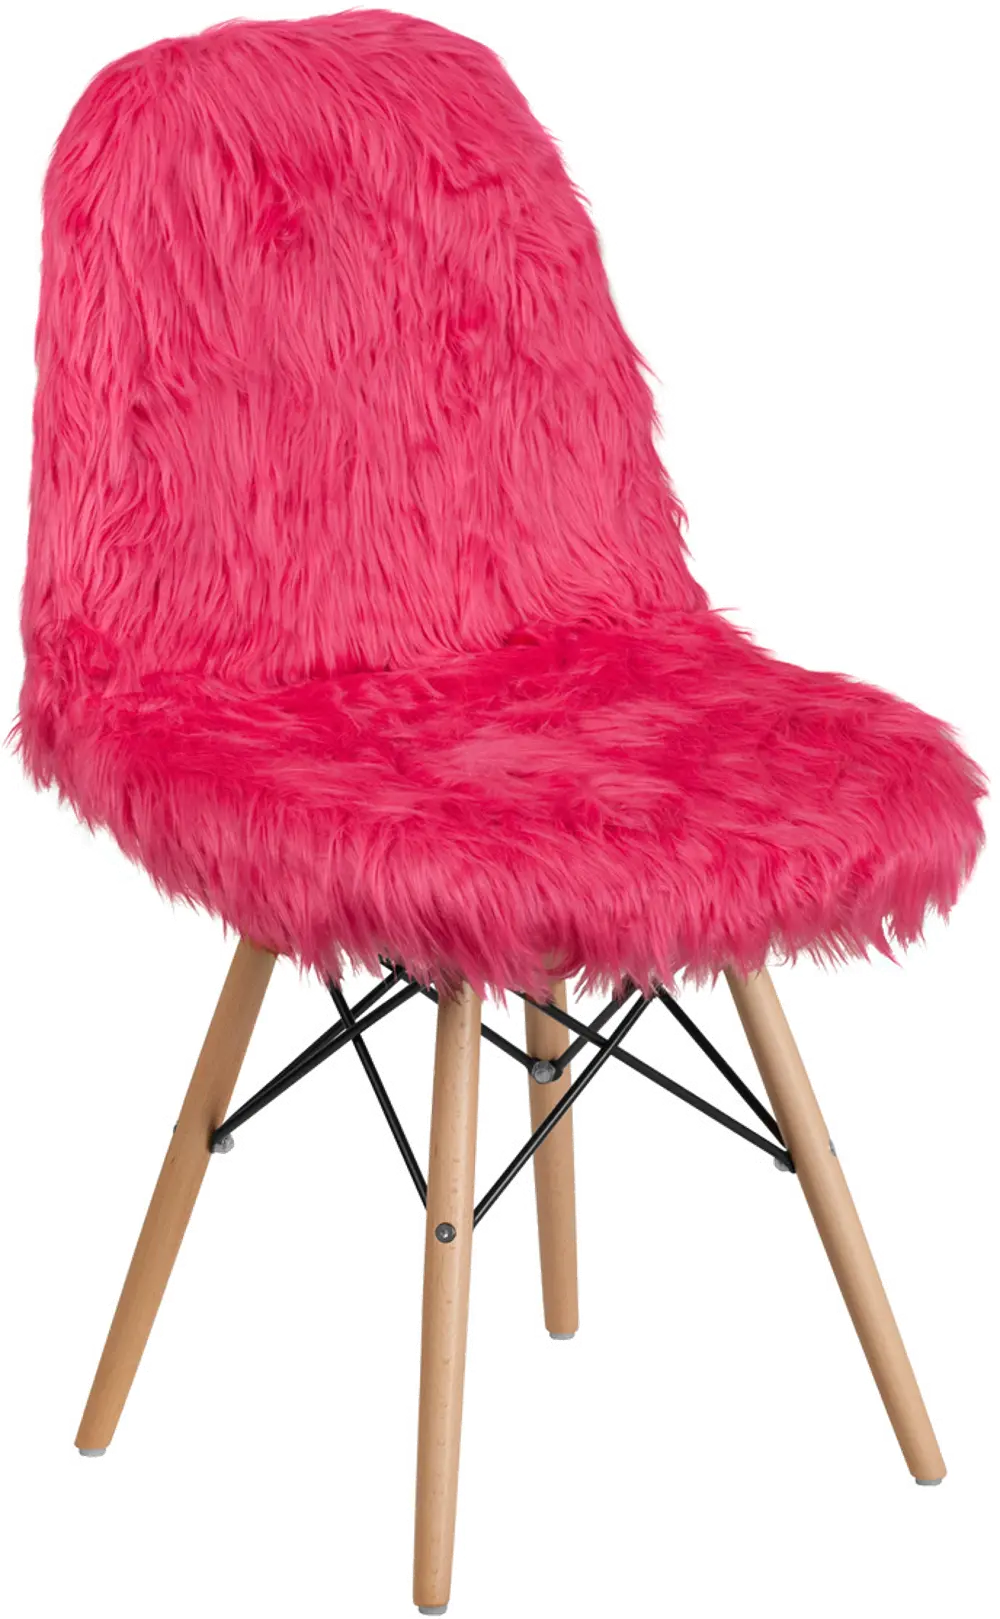 Contemporary Shaggy Hot Pink Accent Chair - Shaggy Dog-1